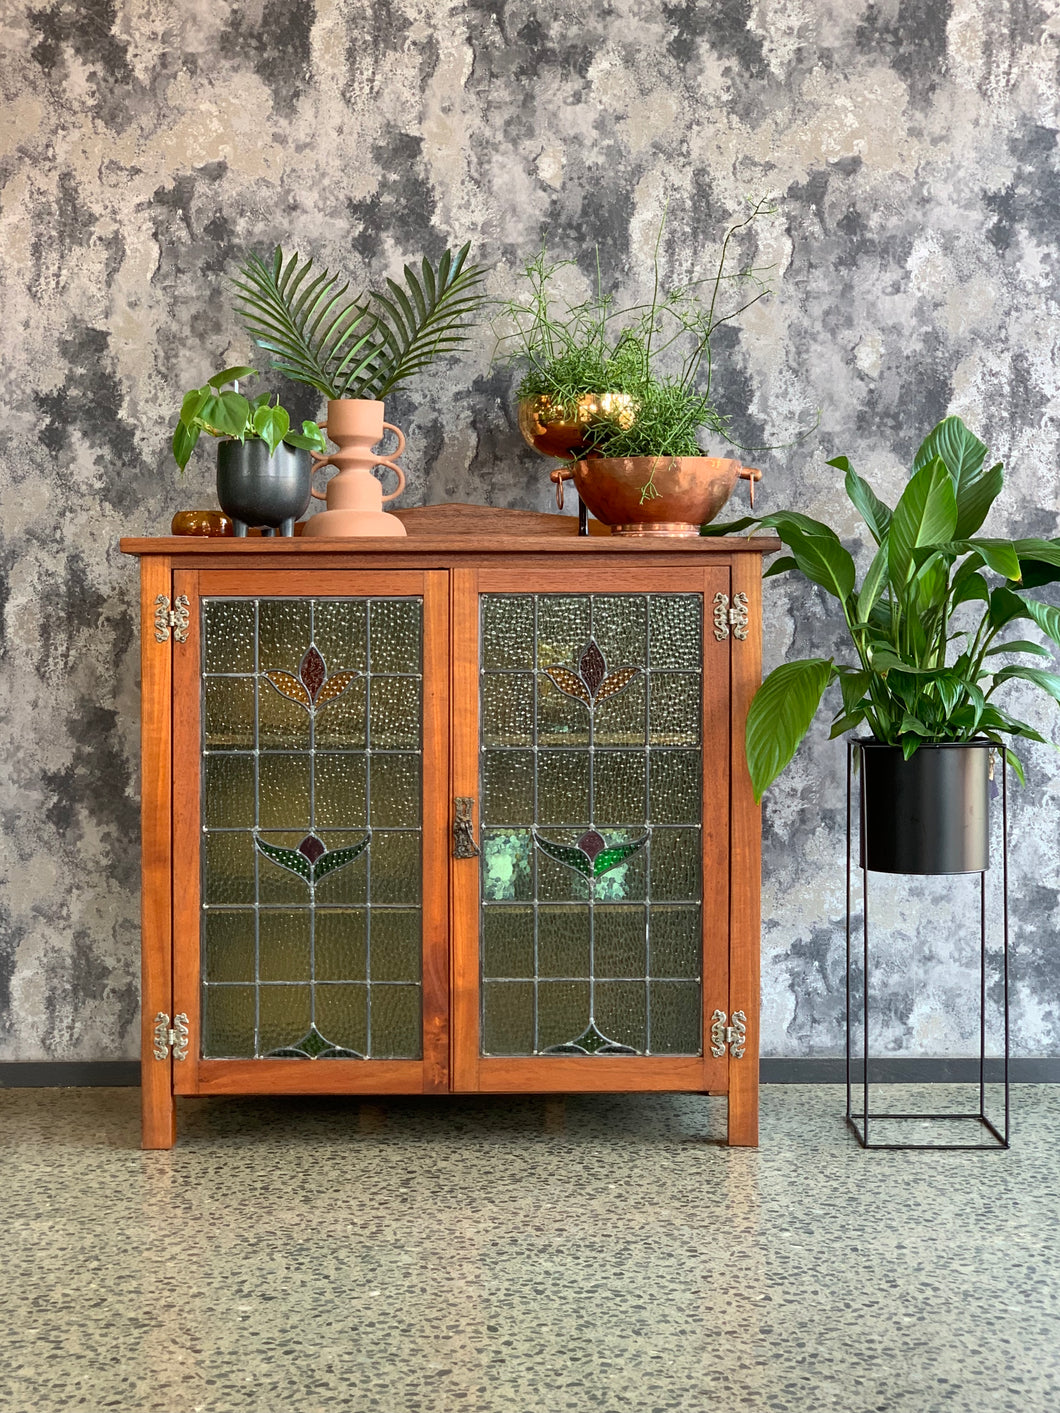 Vintage Cabinet With Lead Glass doors